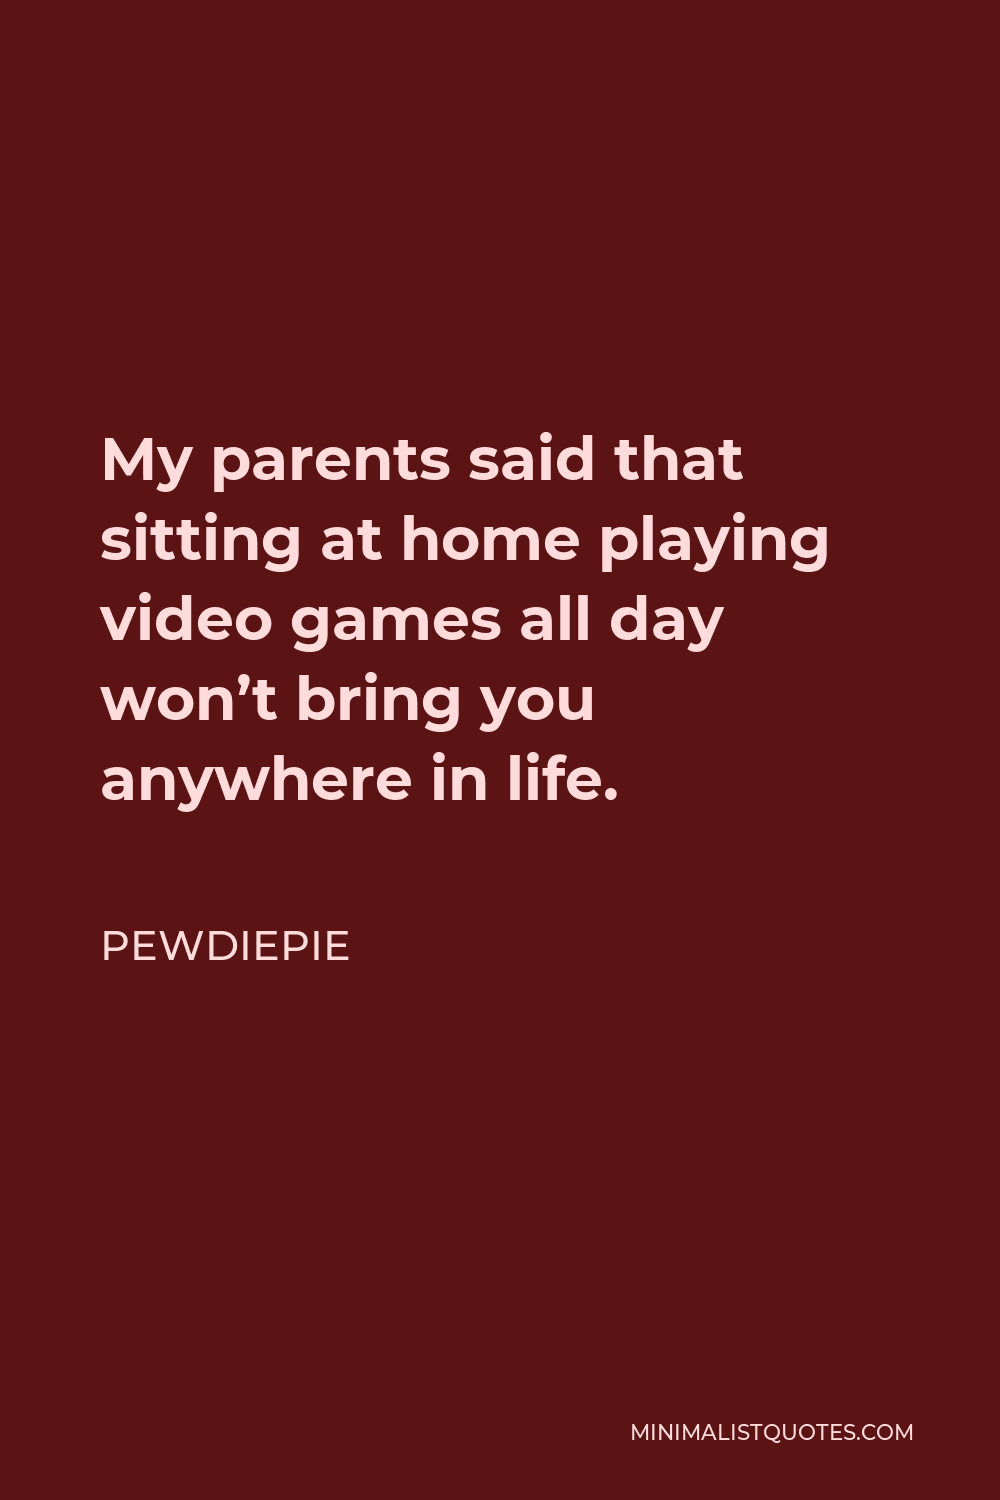 PewDiePie Quote - My parents said that sitting at home playing video games all day won’t bring you anywhere in life.